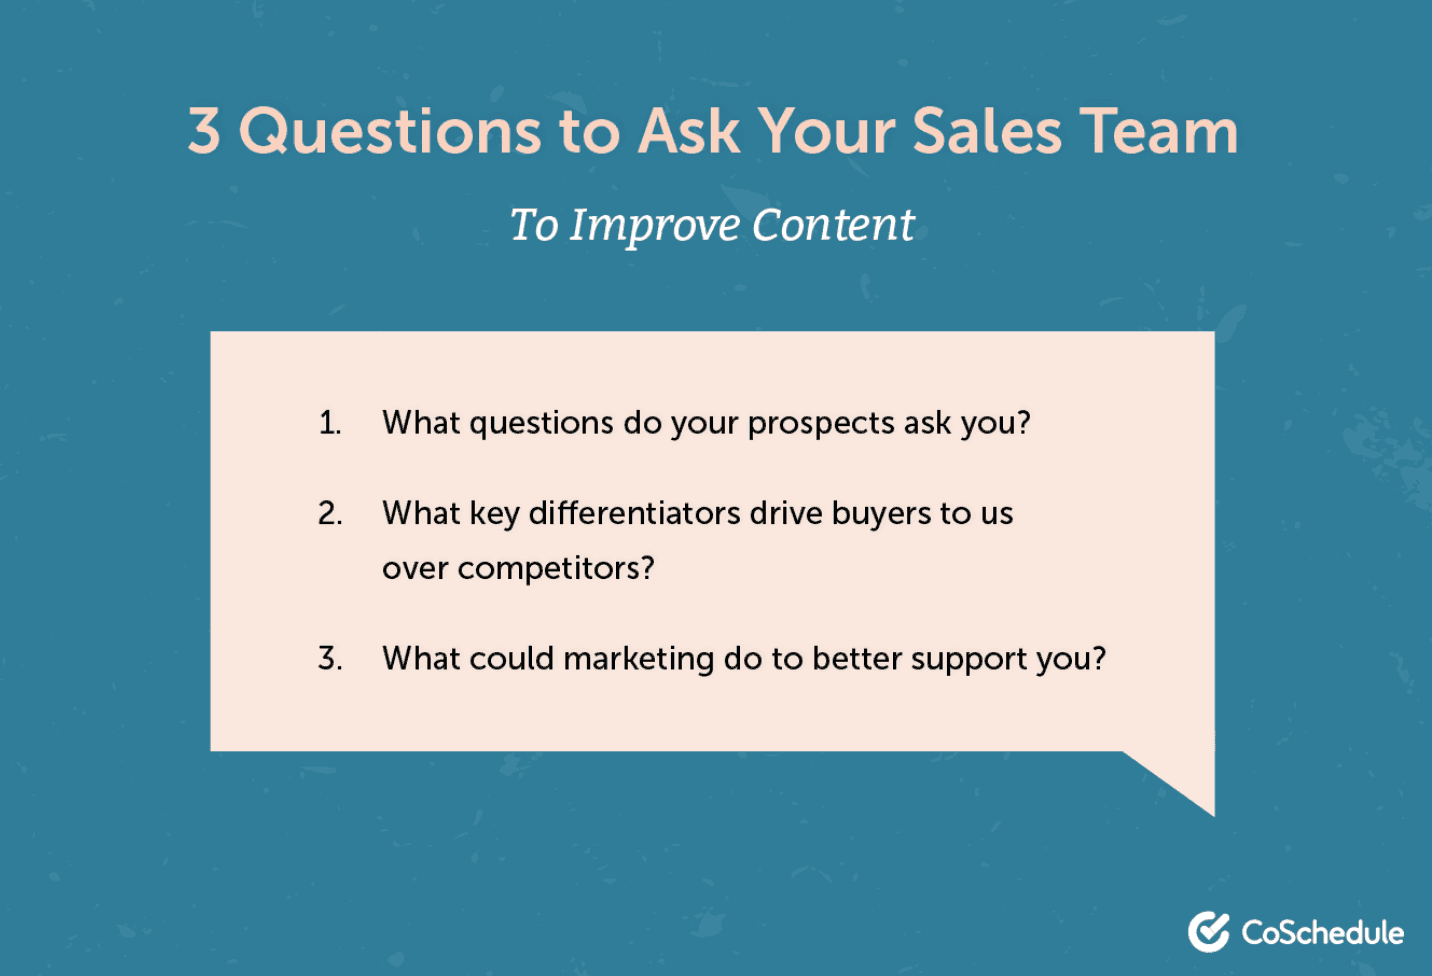 3 main questions to ask your sales team